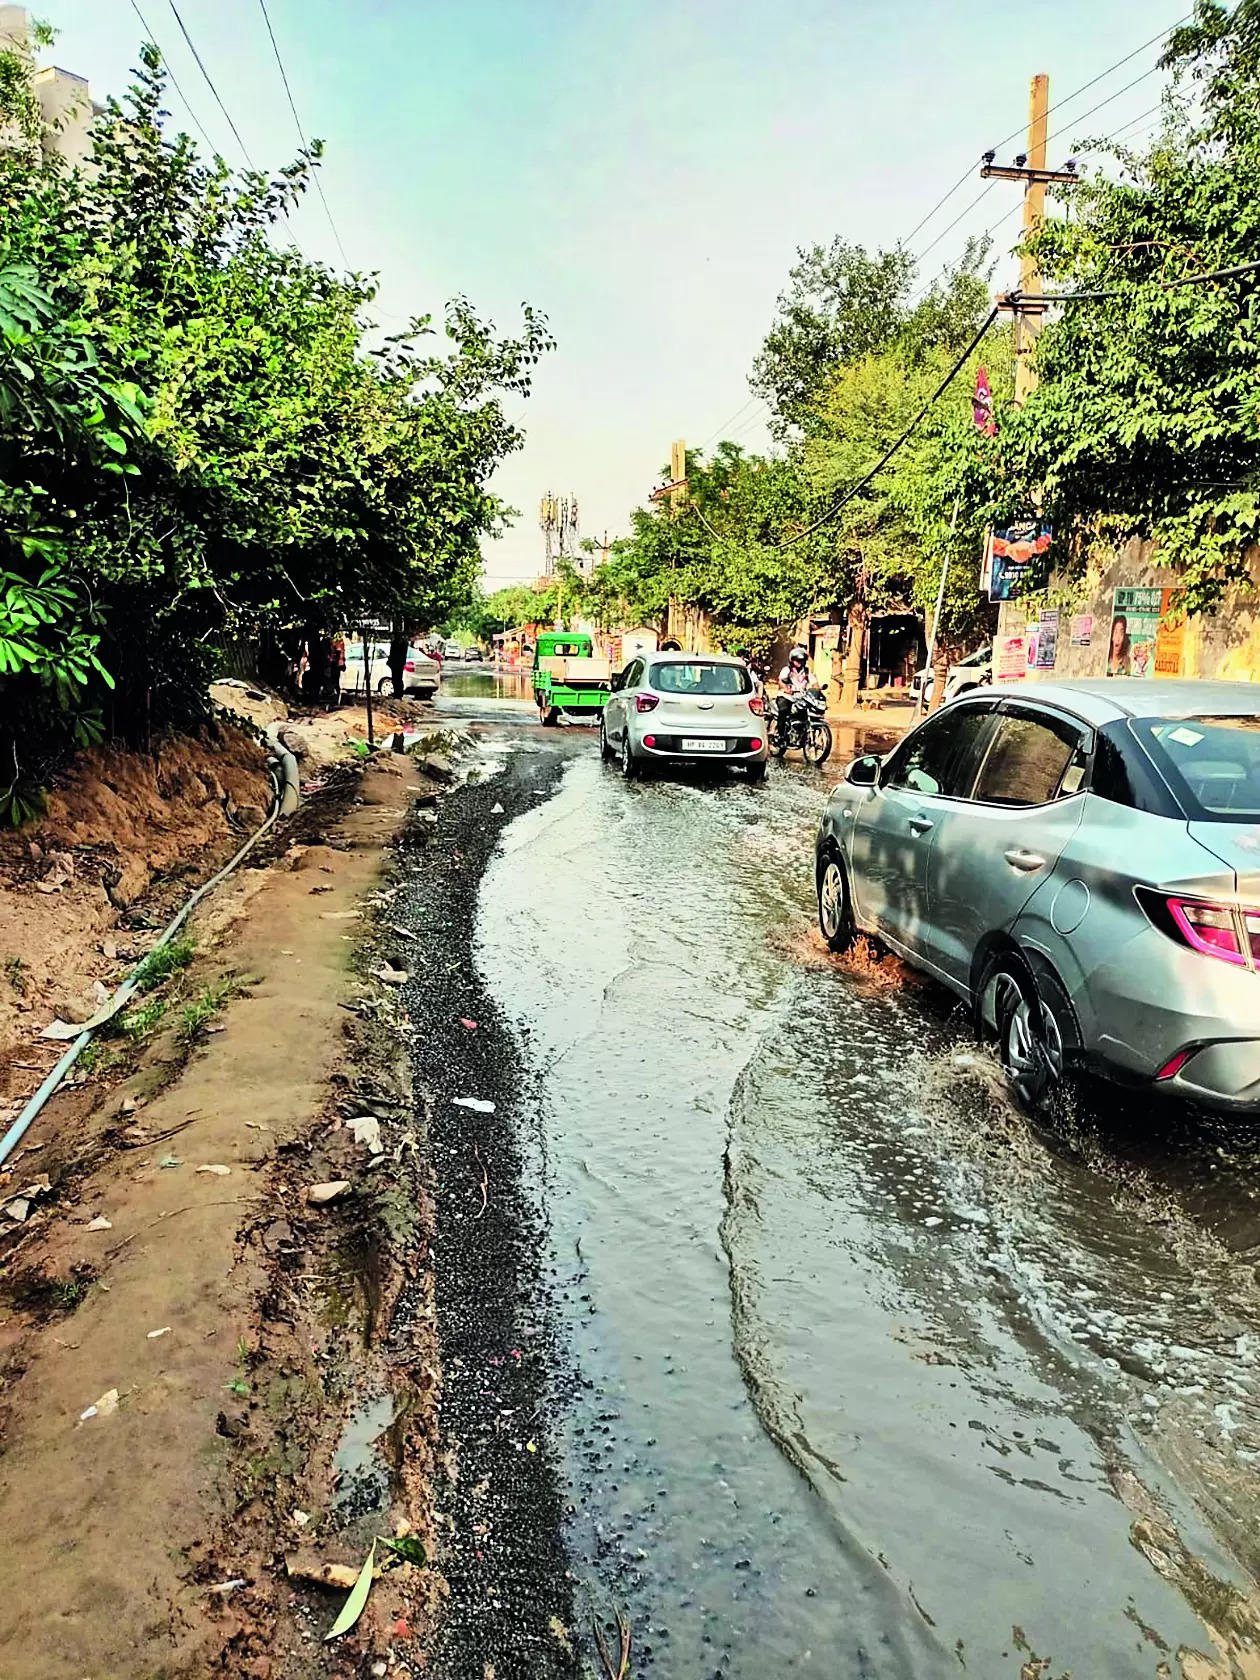 Overflowing drains & potholes: This road is an accident hotspot